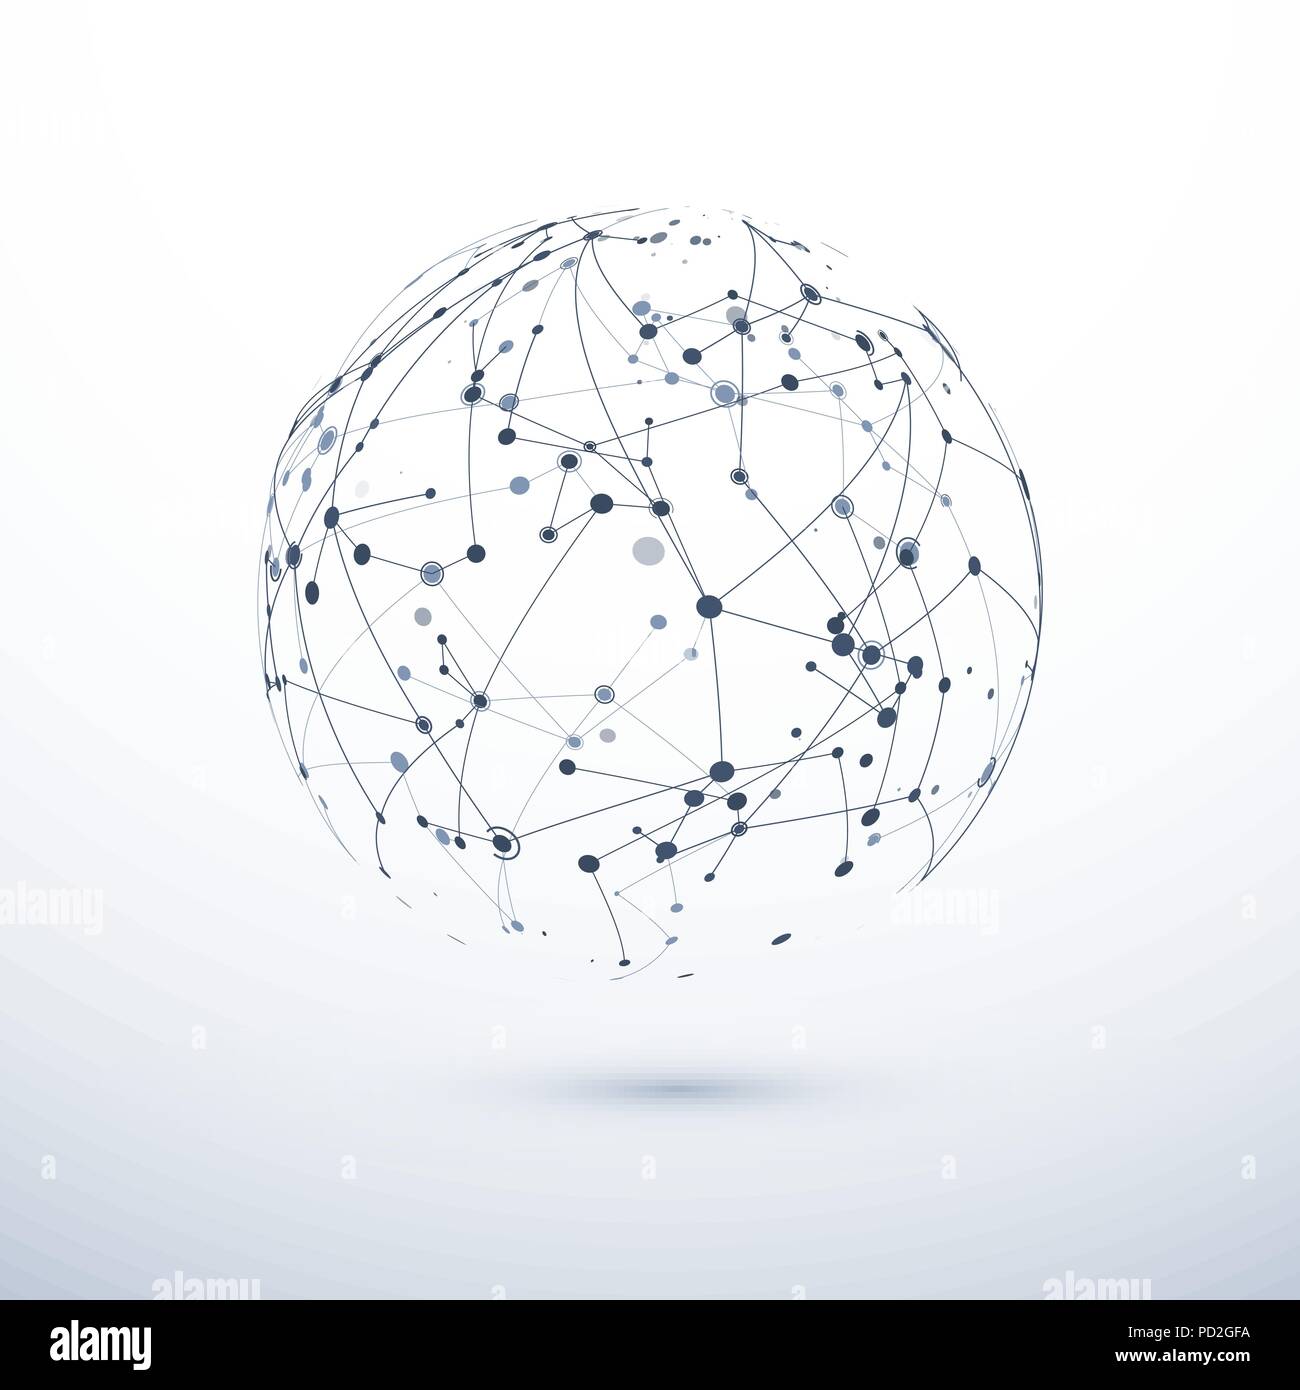 Global network icon. Abstract structure of worldwide web. Sphere with nodes and connections. Vector illustration Stock Vector